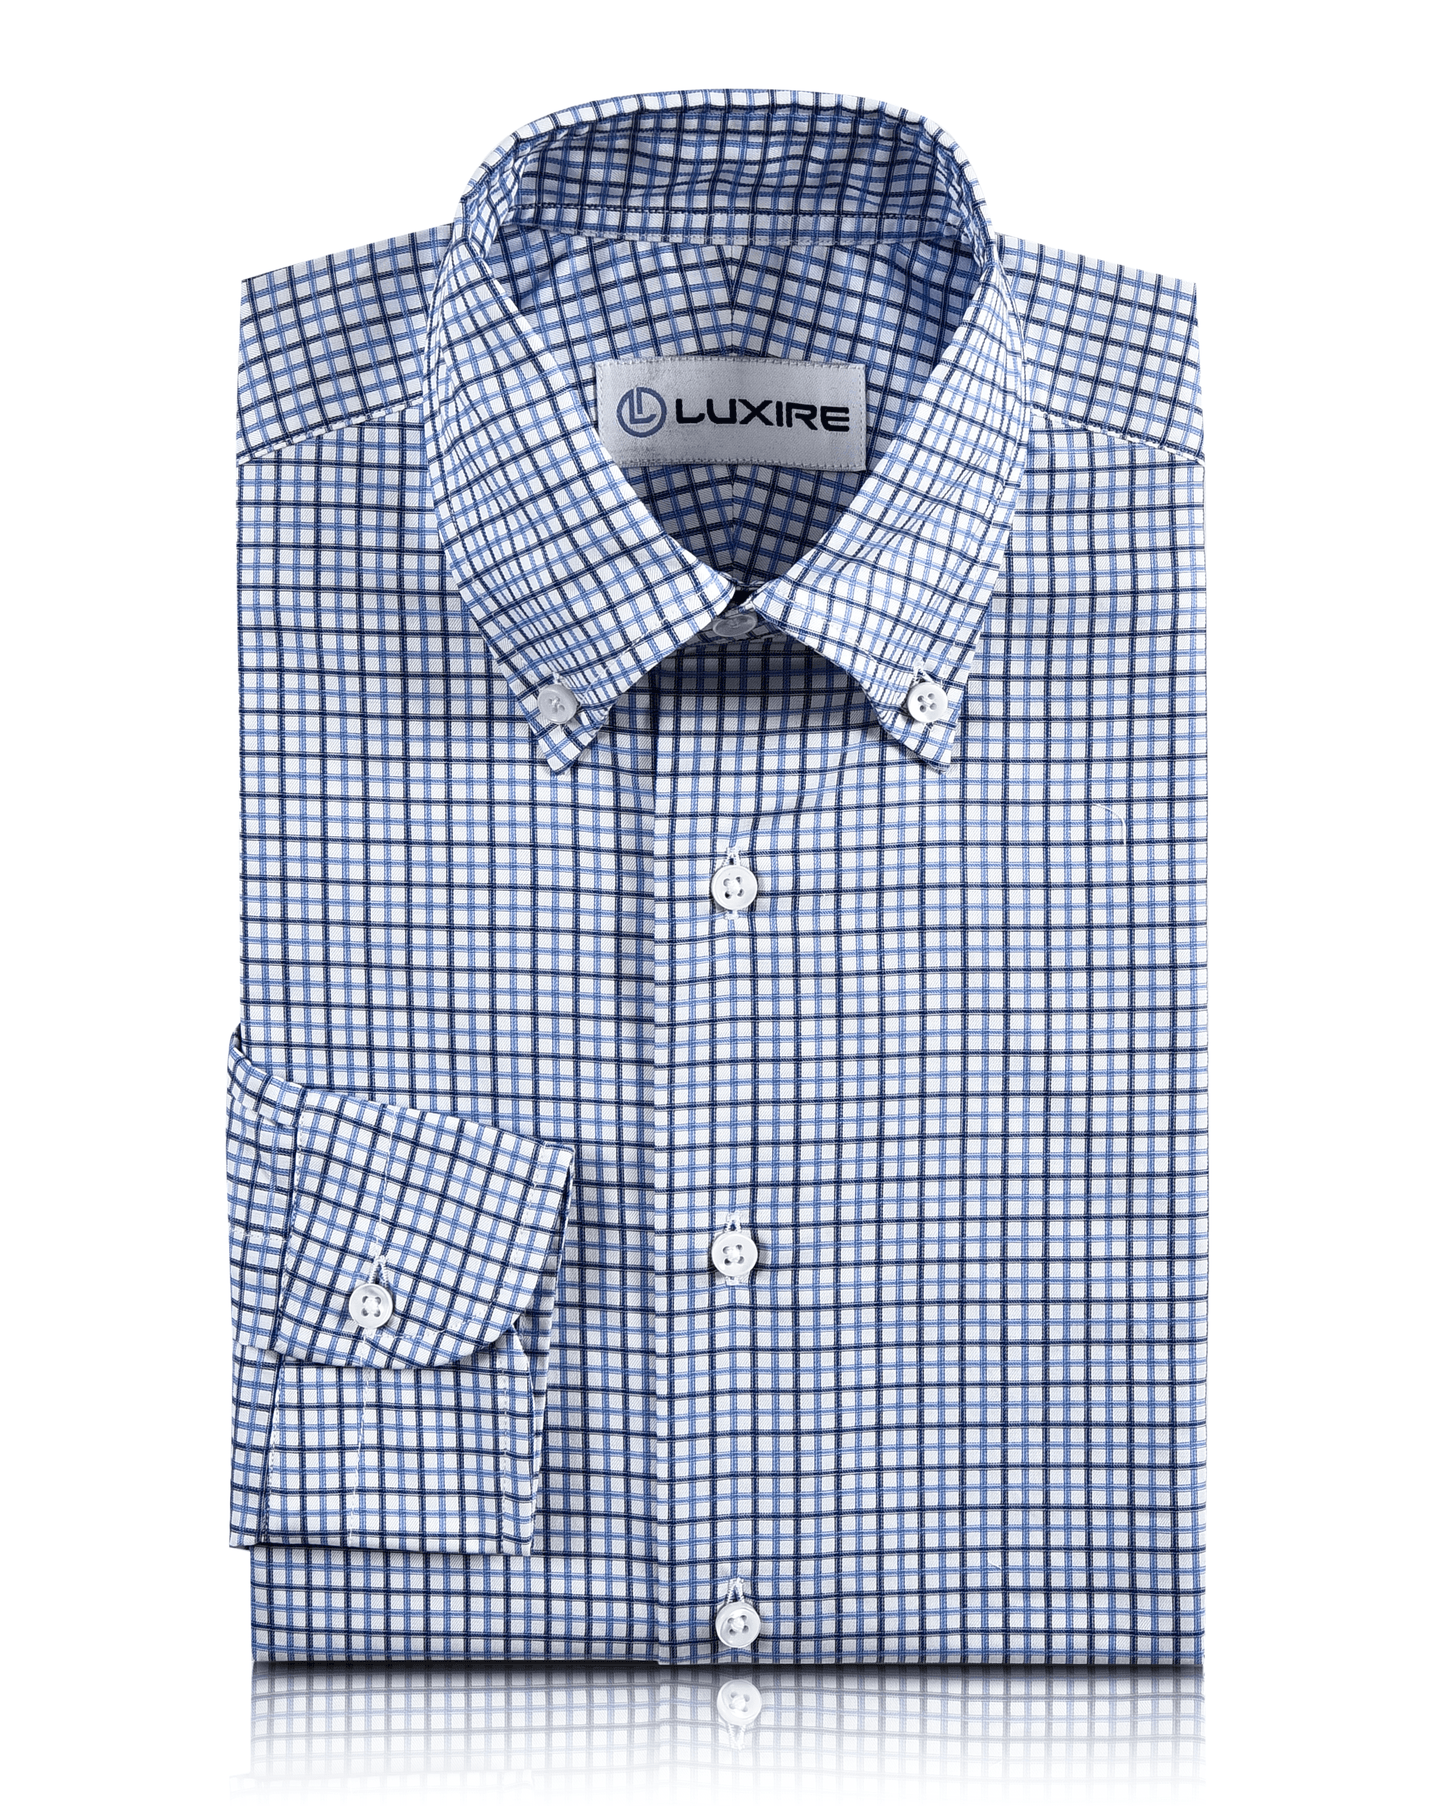 Front closeup view of custom check shirts for men by Luxire in navy sky tattersall